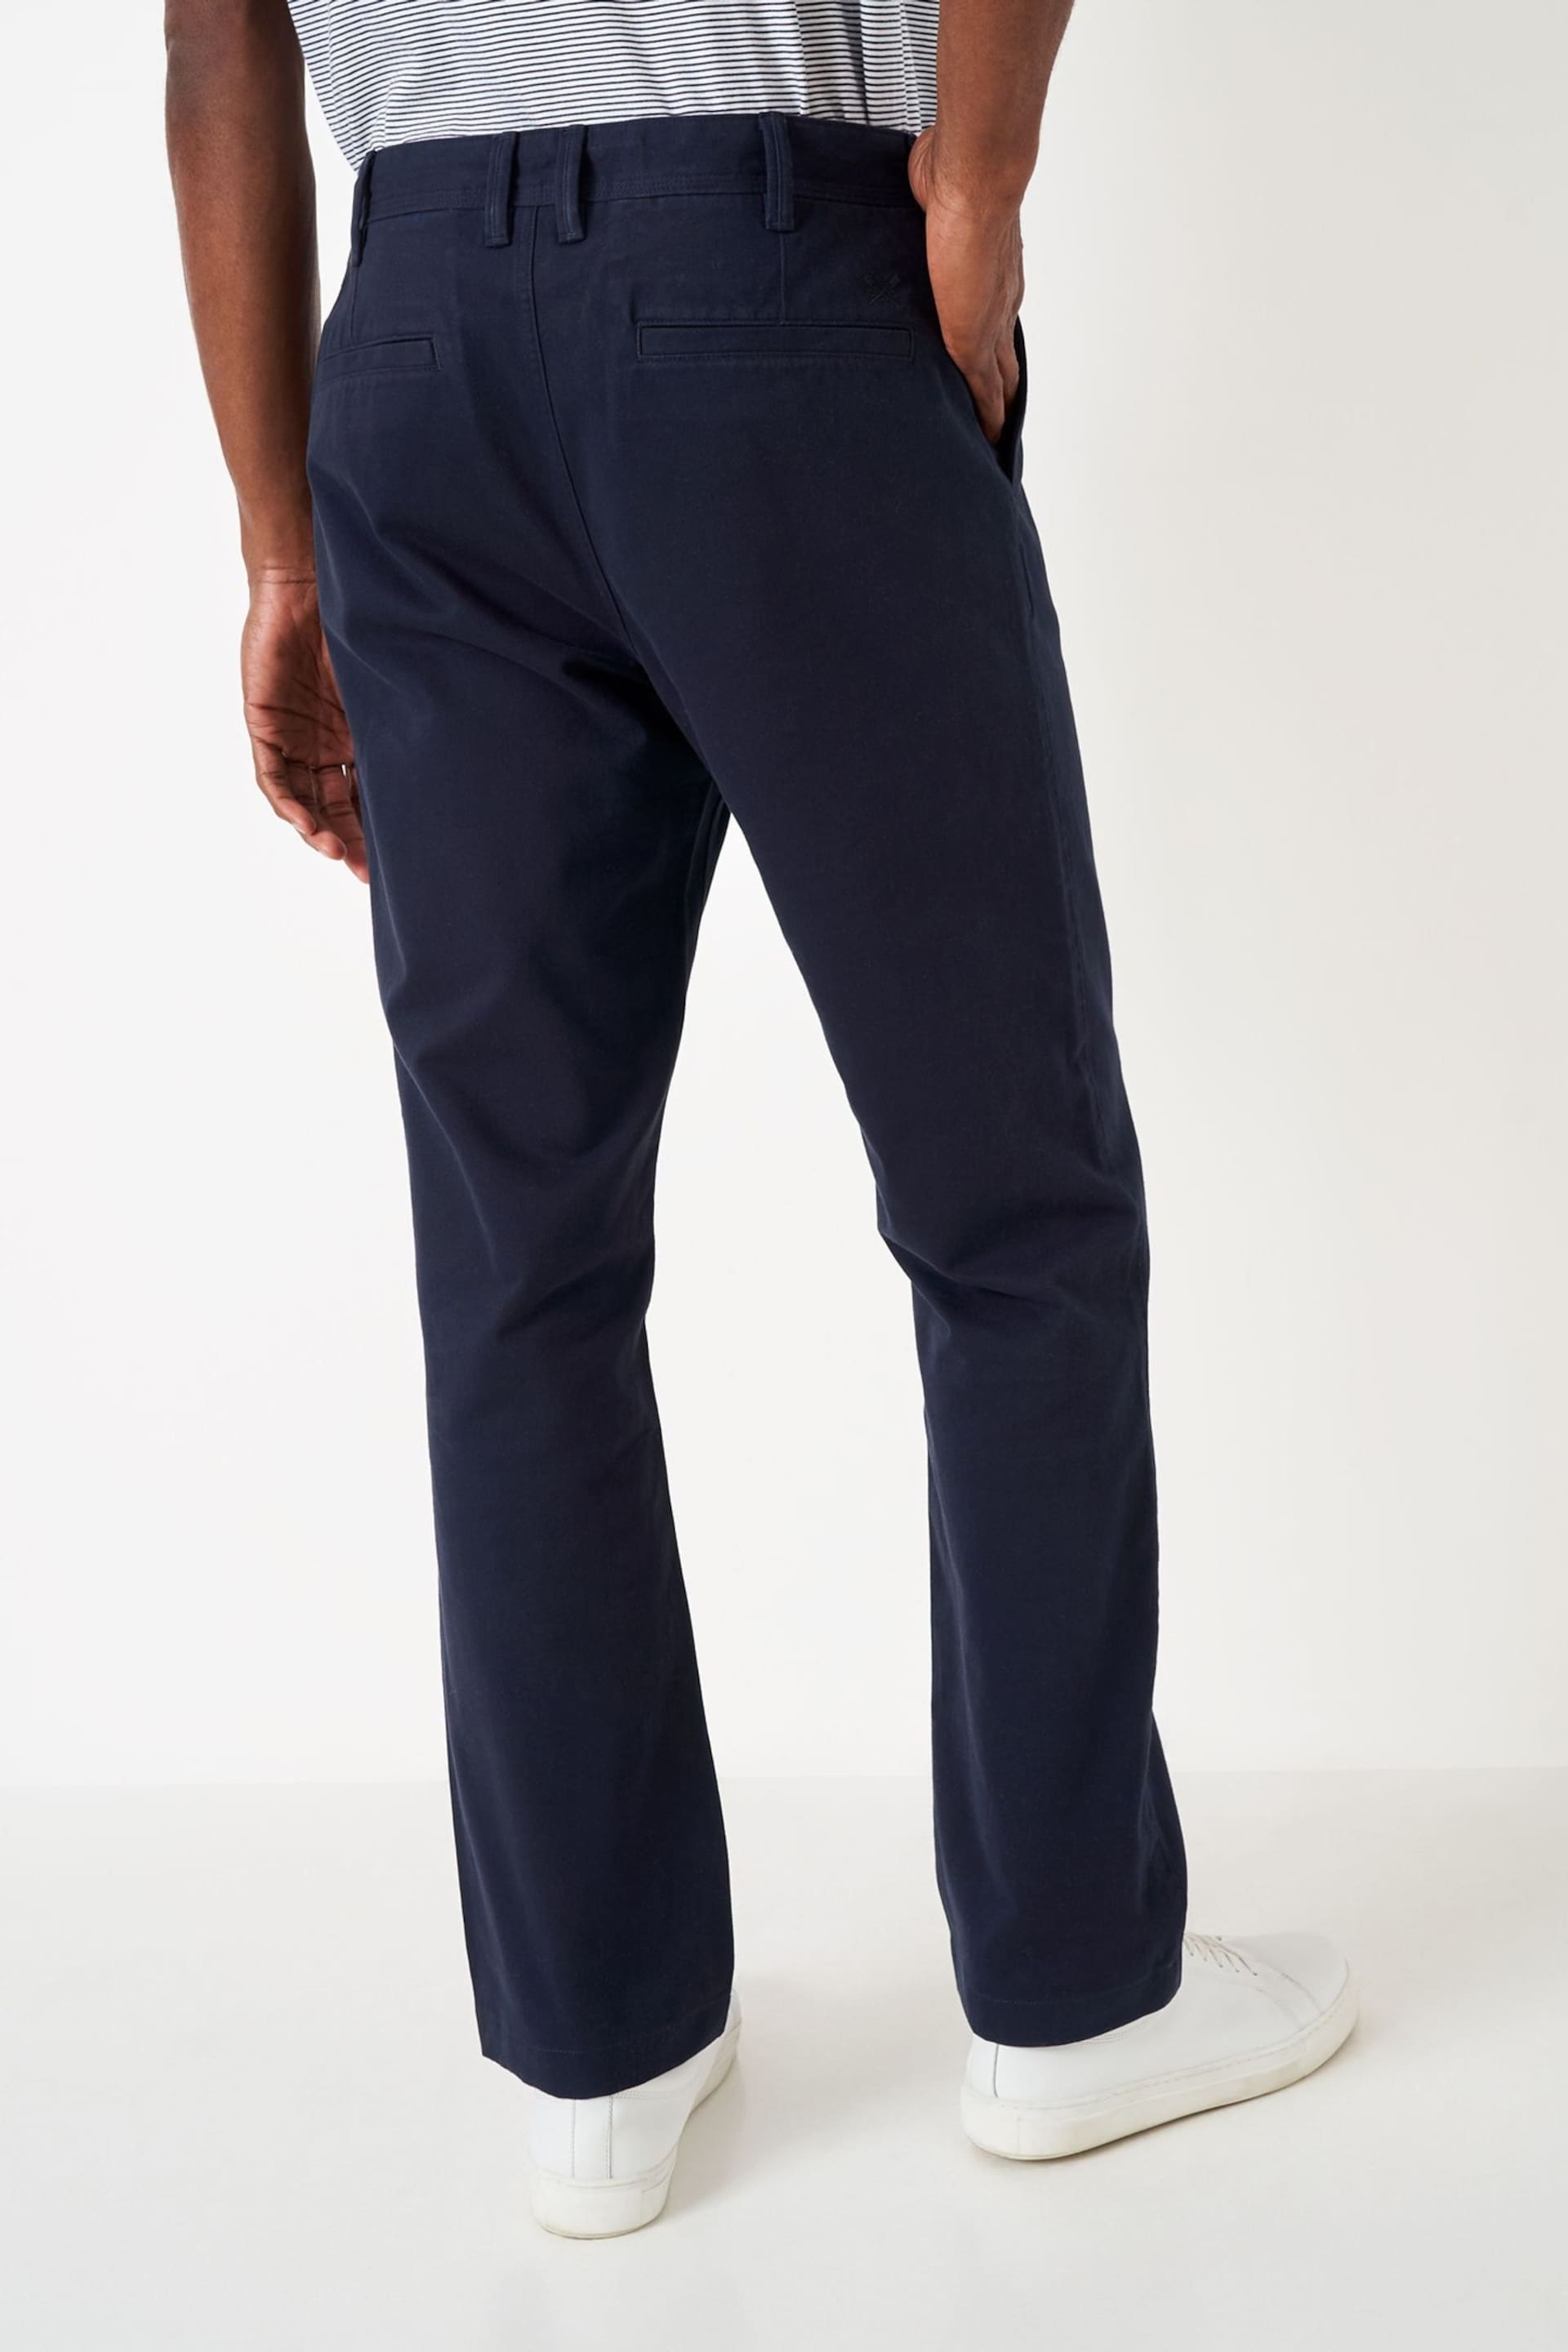 Crew Clothing Cotton Vintage Chinos - Image 2 of 4